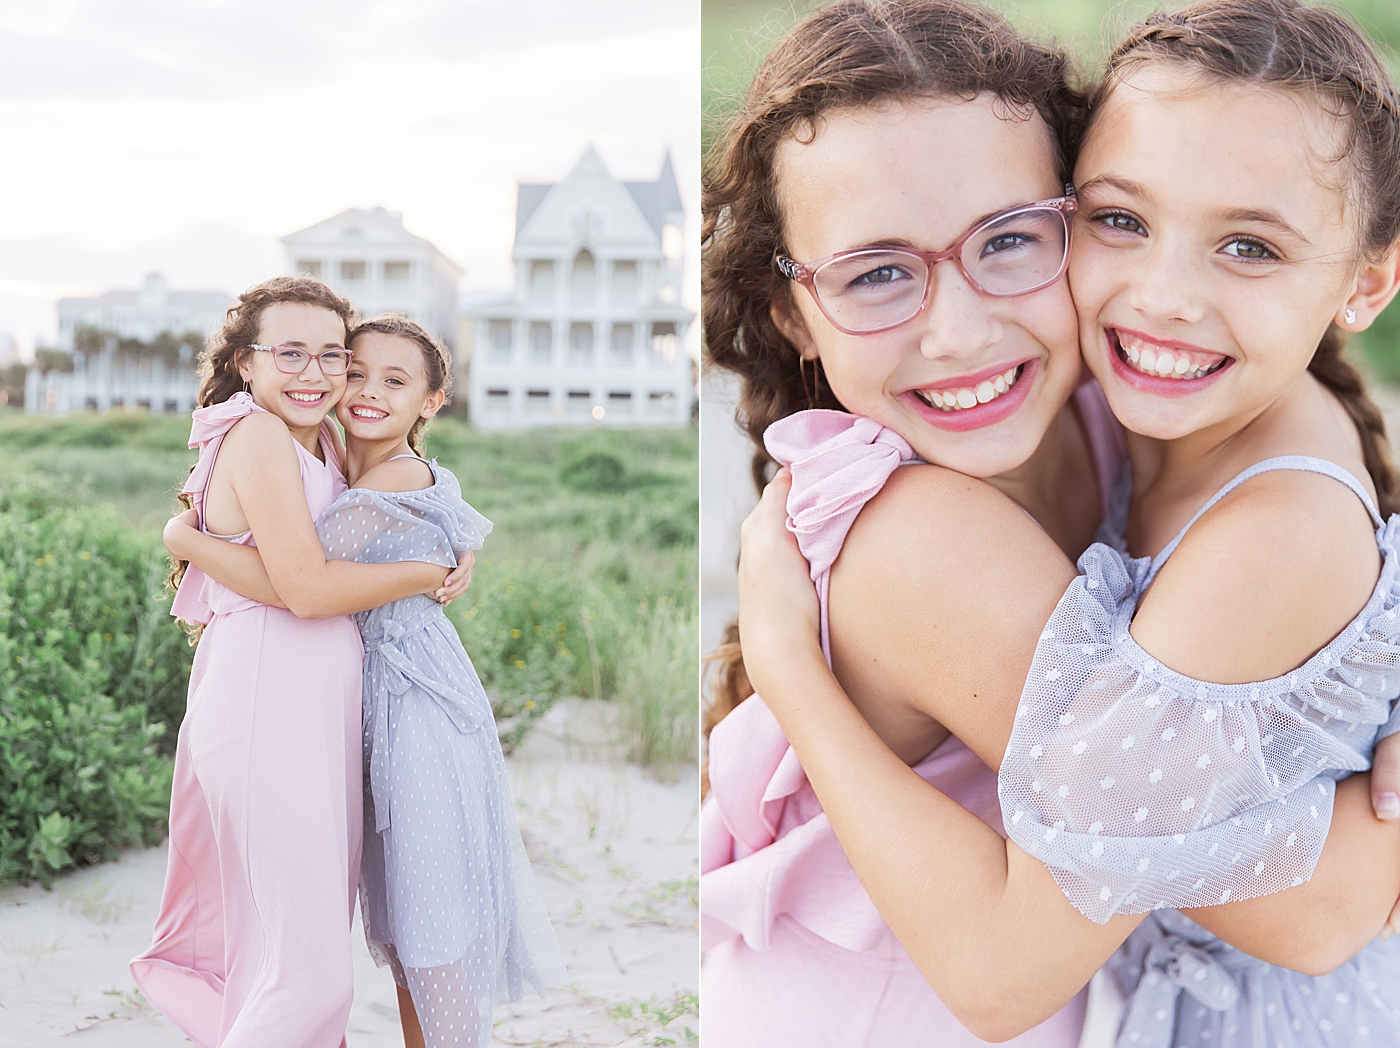 Sisters hugging during family photos. Photo by Fresh Light Photography.